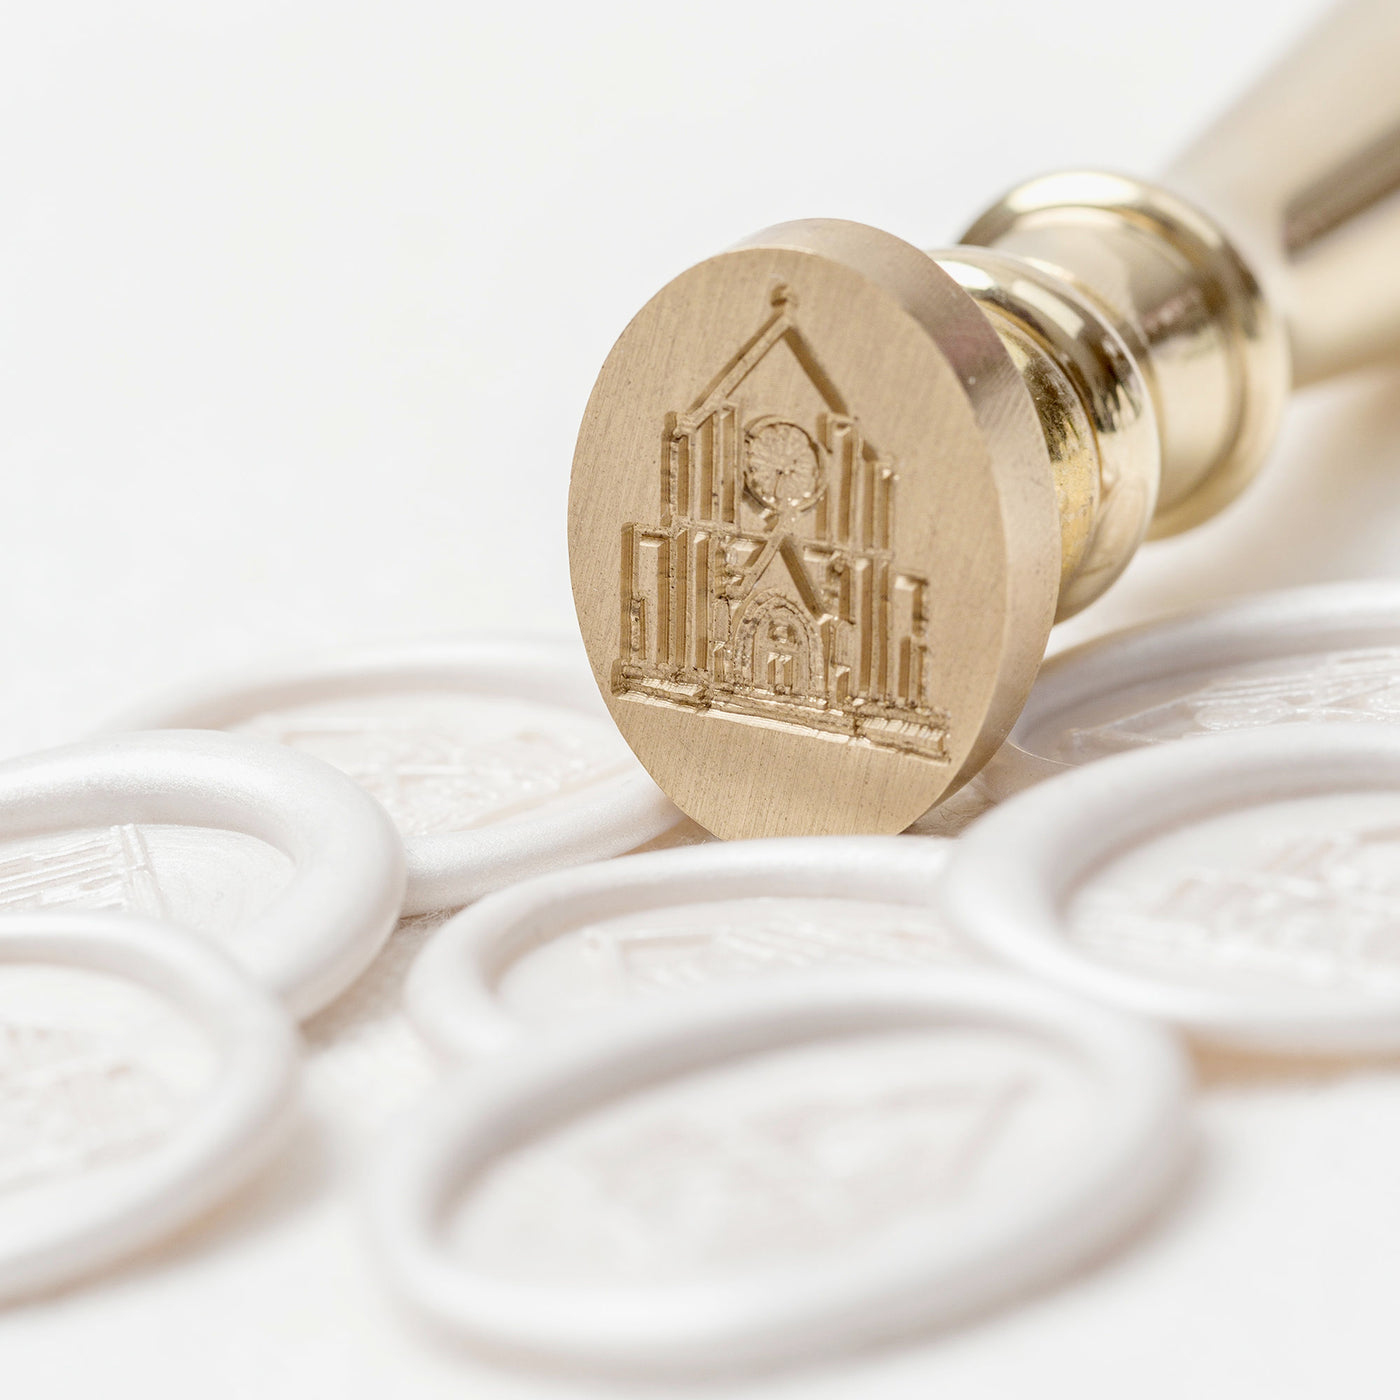 CHURCH ILLUSTRATION OVAL WAX SEAL STAMP - WORTH THE WAIT